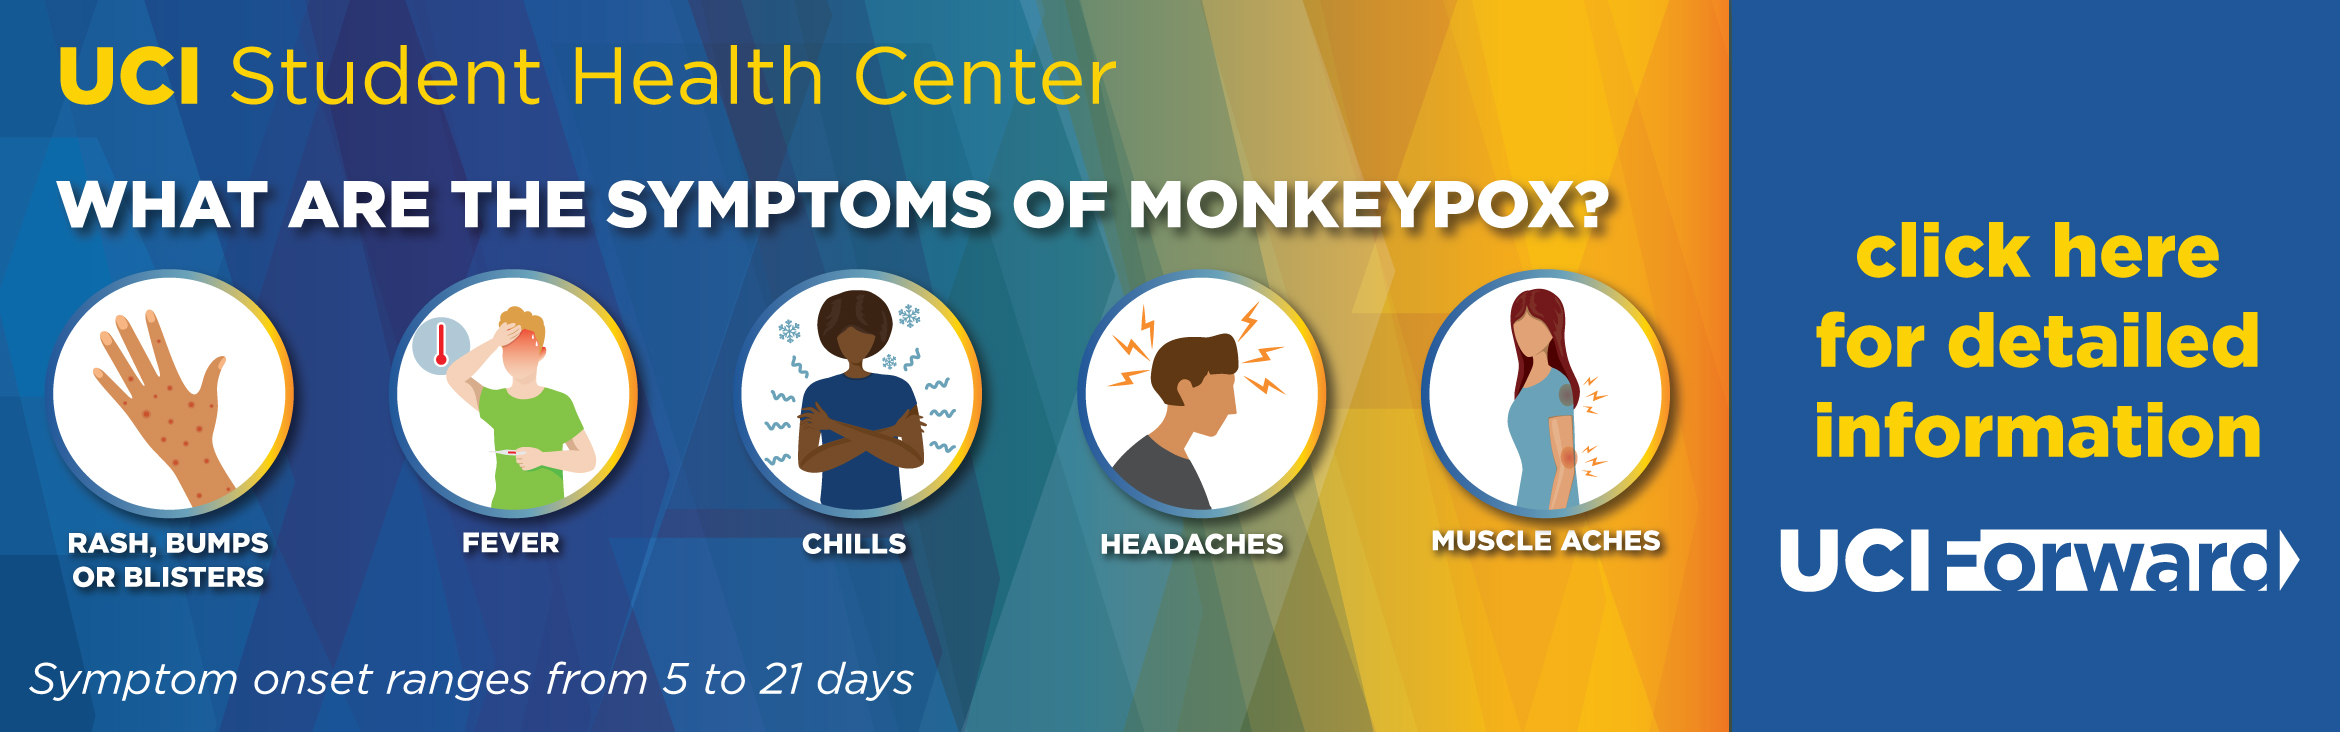 What are the symptoms of Monkeypox? 